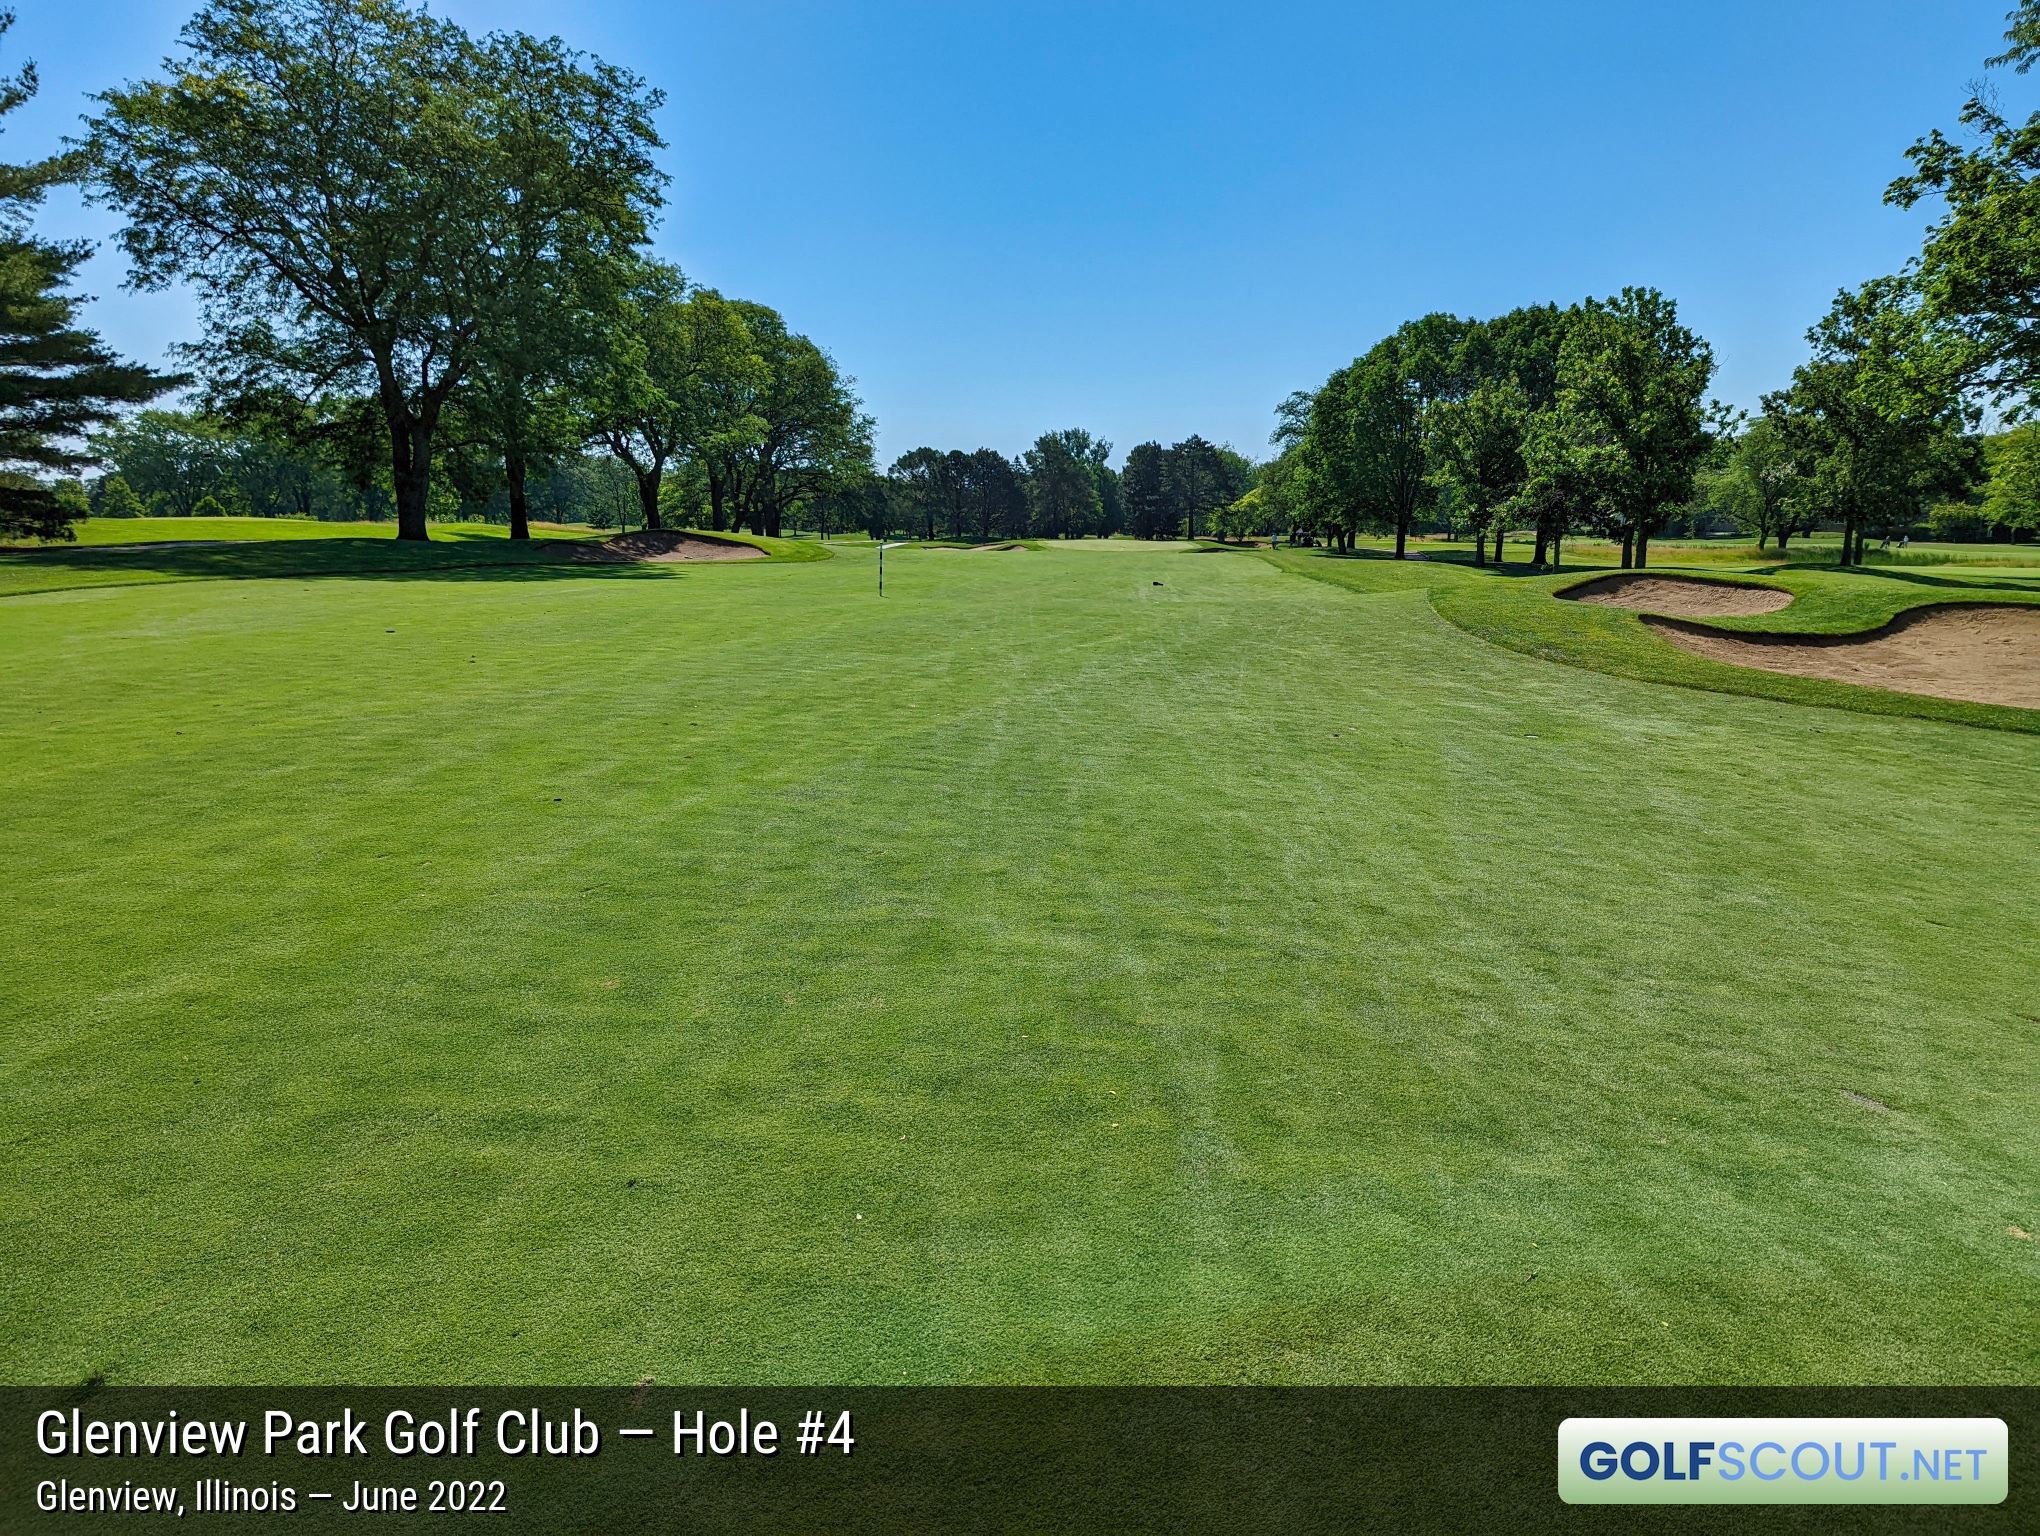 Photo of hole #4 at Glenview Park Golf Club in Glenview, Illinois. 